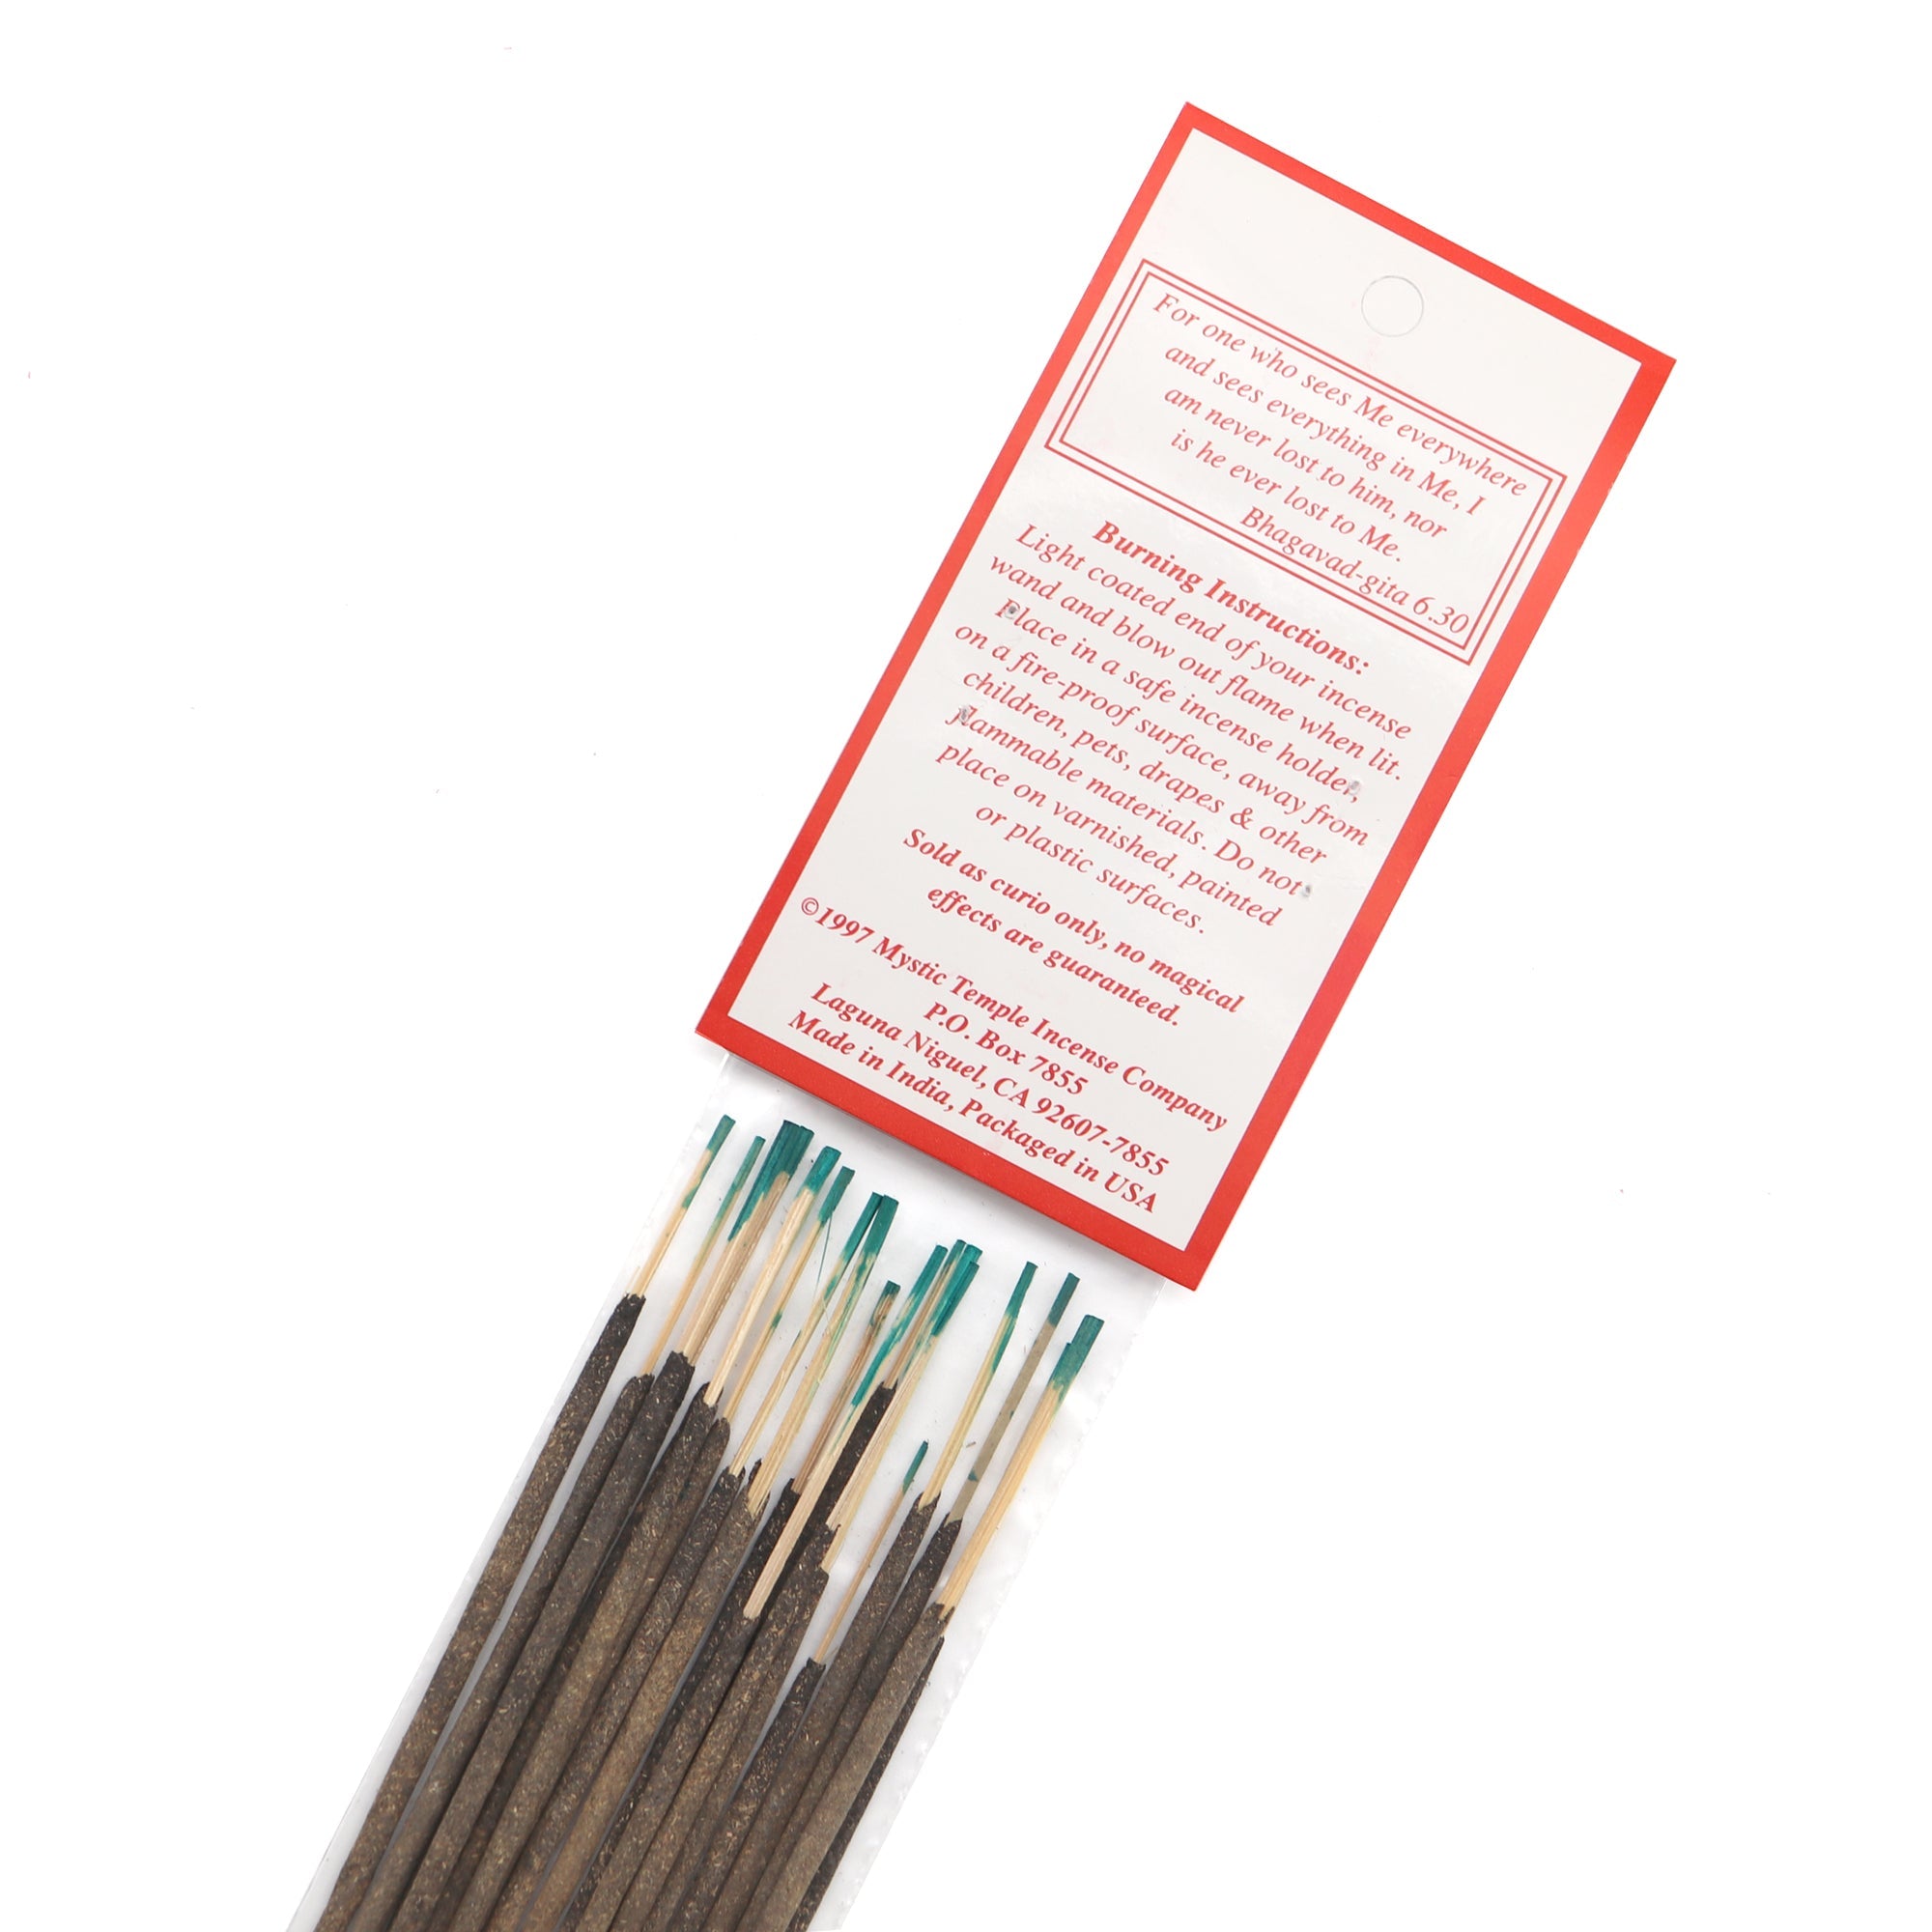 Egyptian Frankincense Incense - 13 Moons